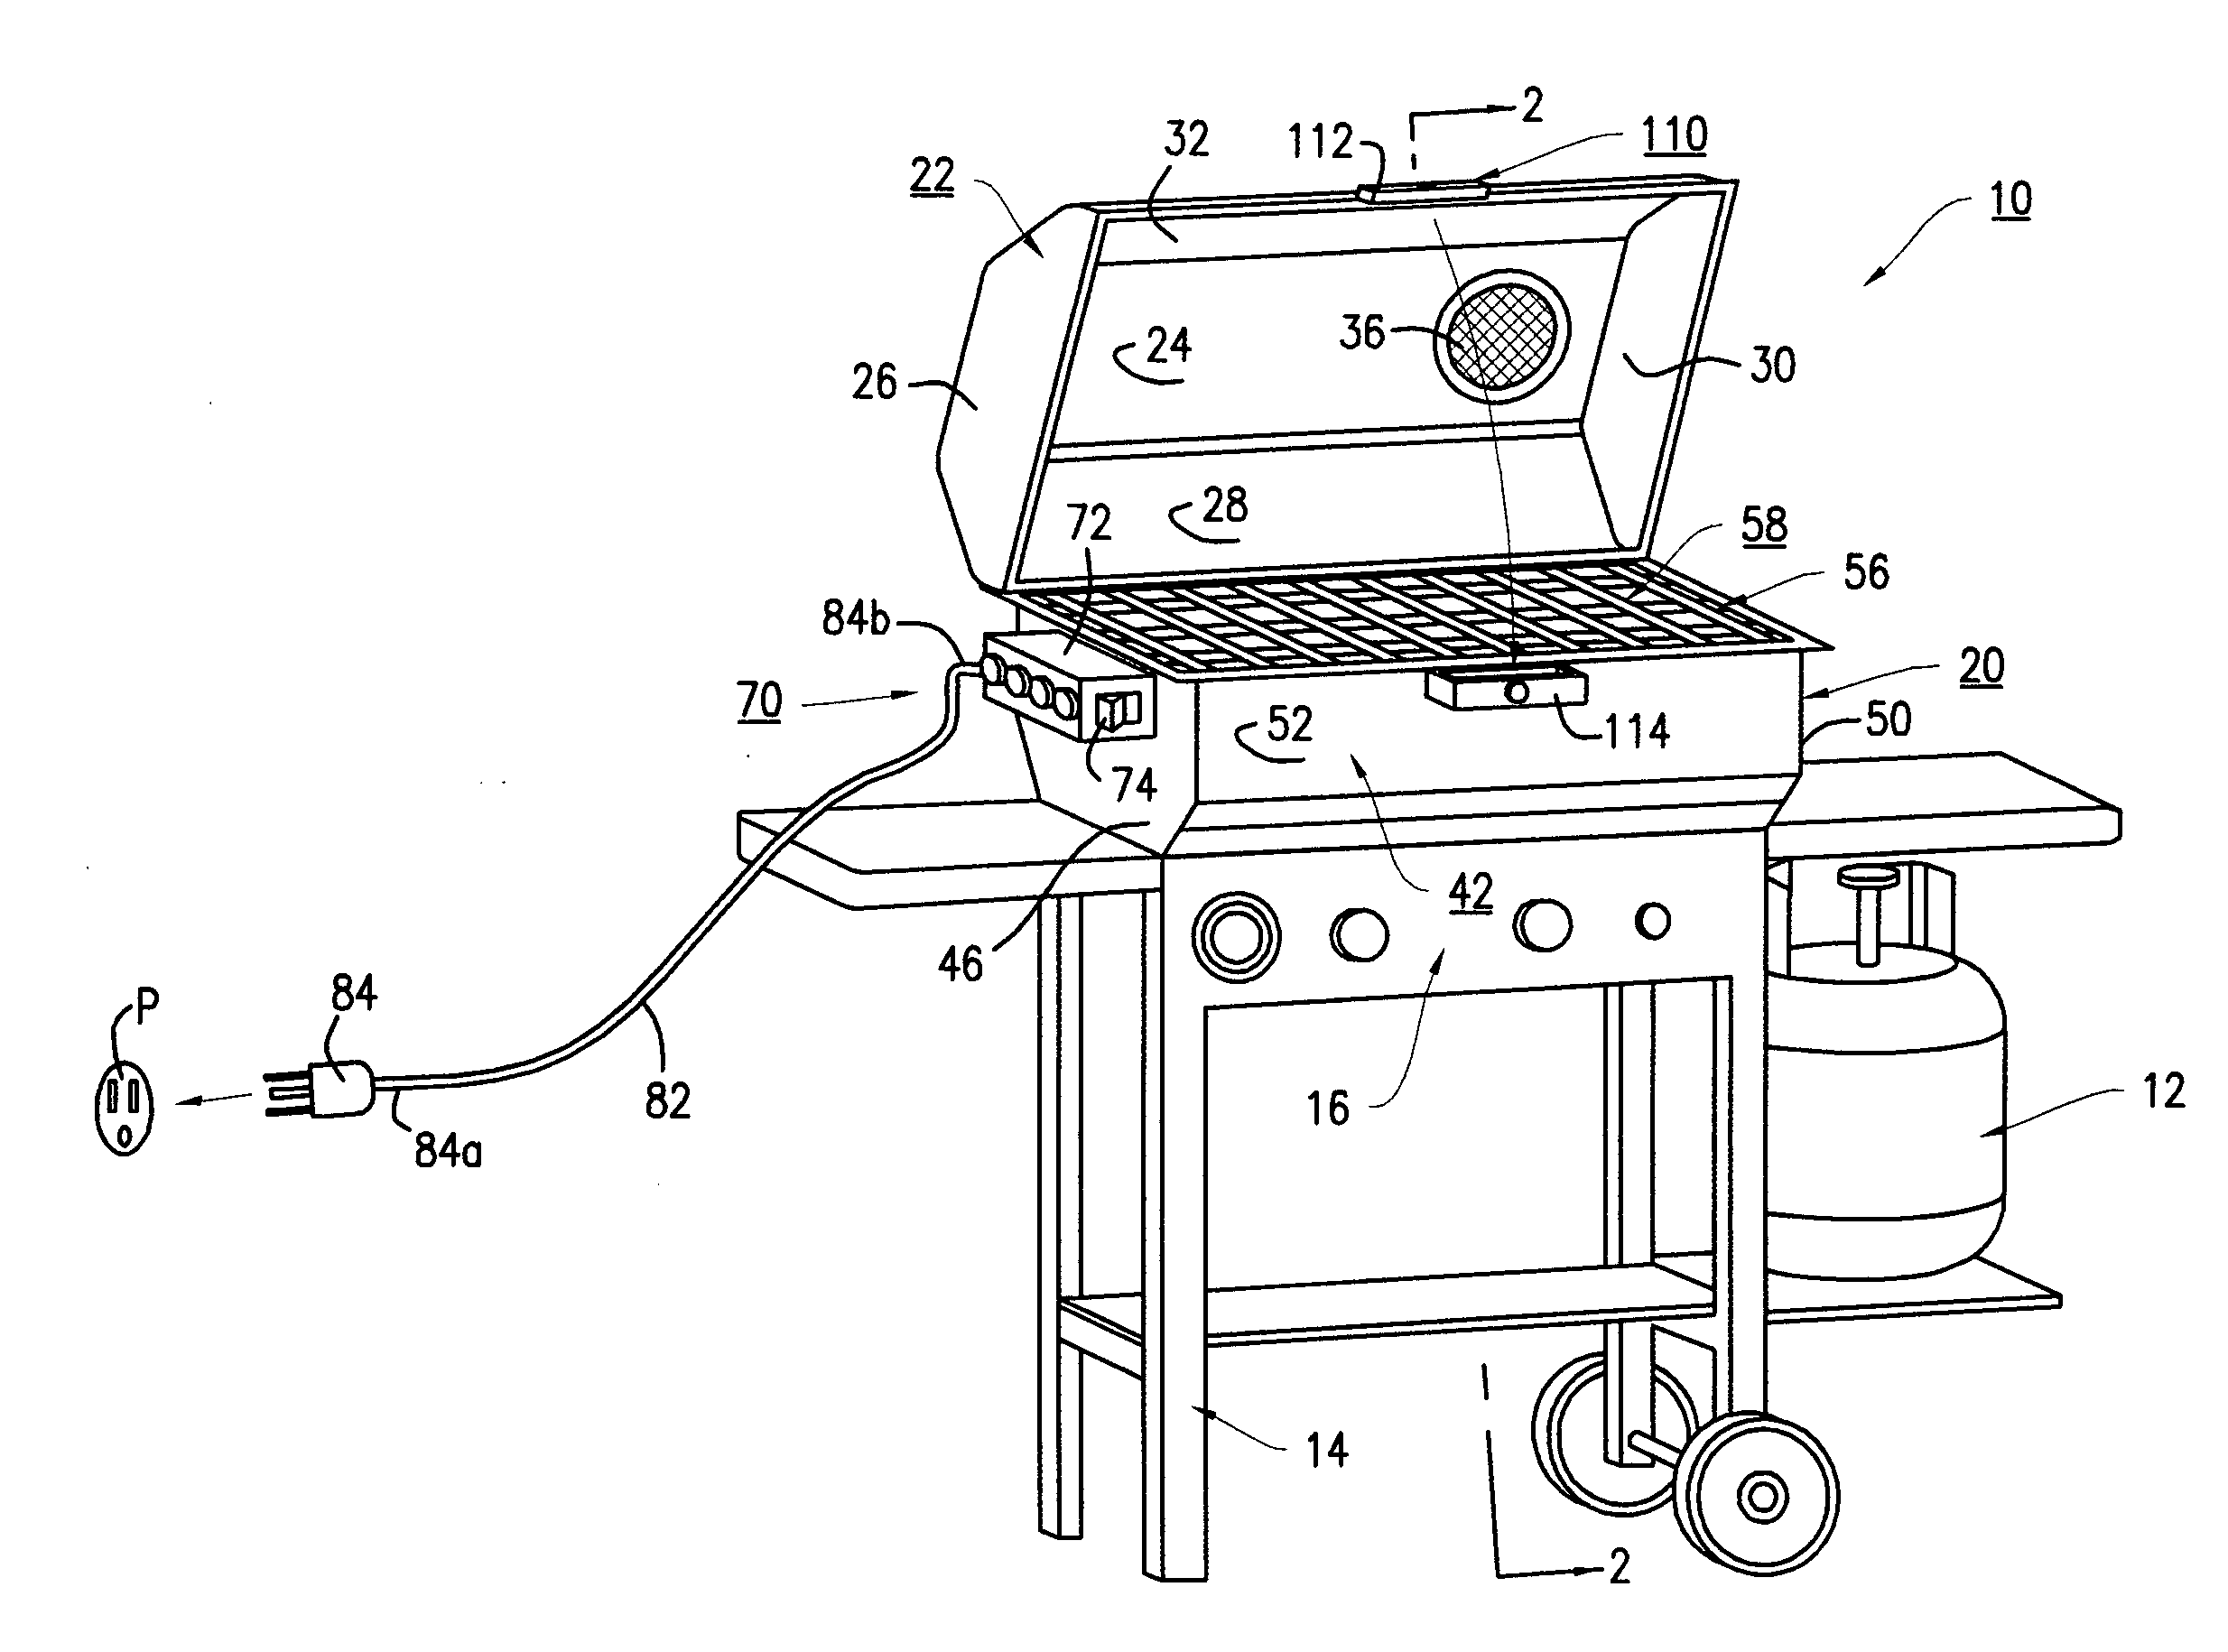 Outdoor gas barbecue grill with an electric self-cleaning unit